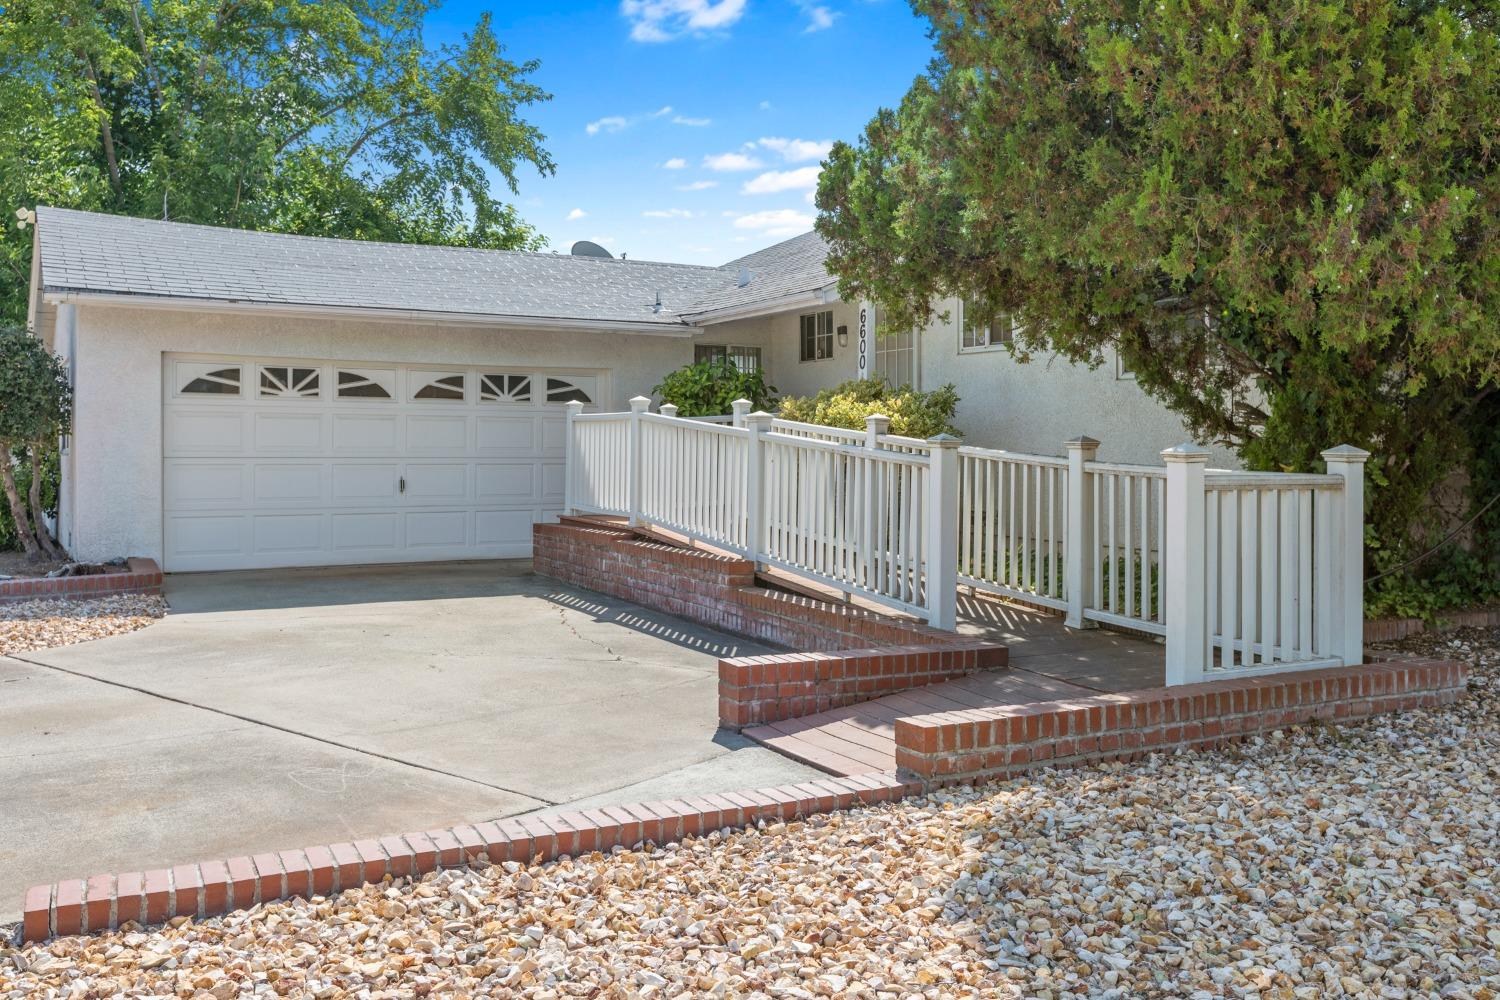 This wonderful home is very clean and ready to move in. Front yard is nicely landscaped for drought 